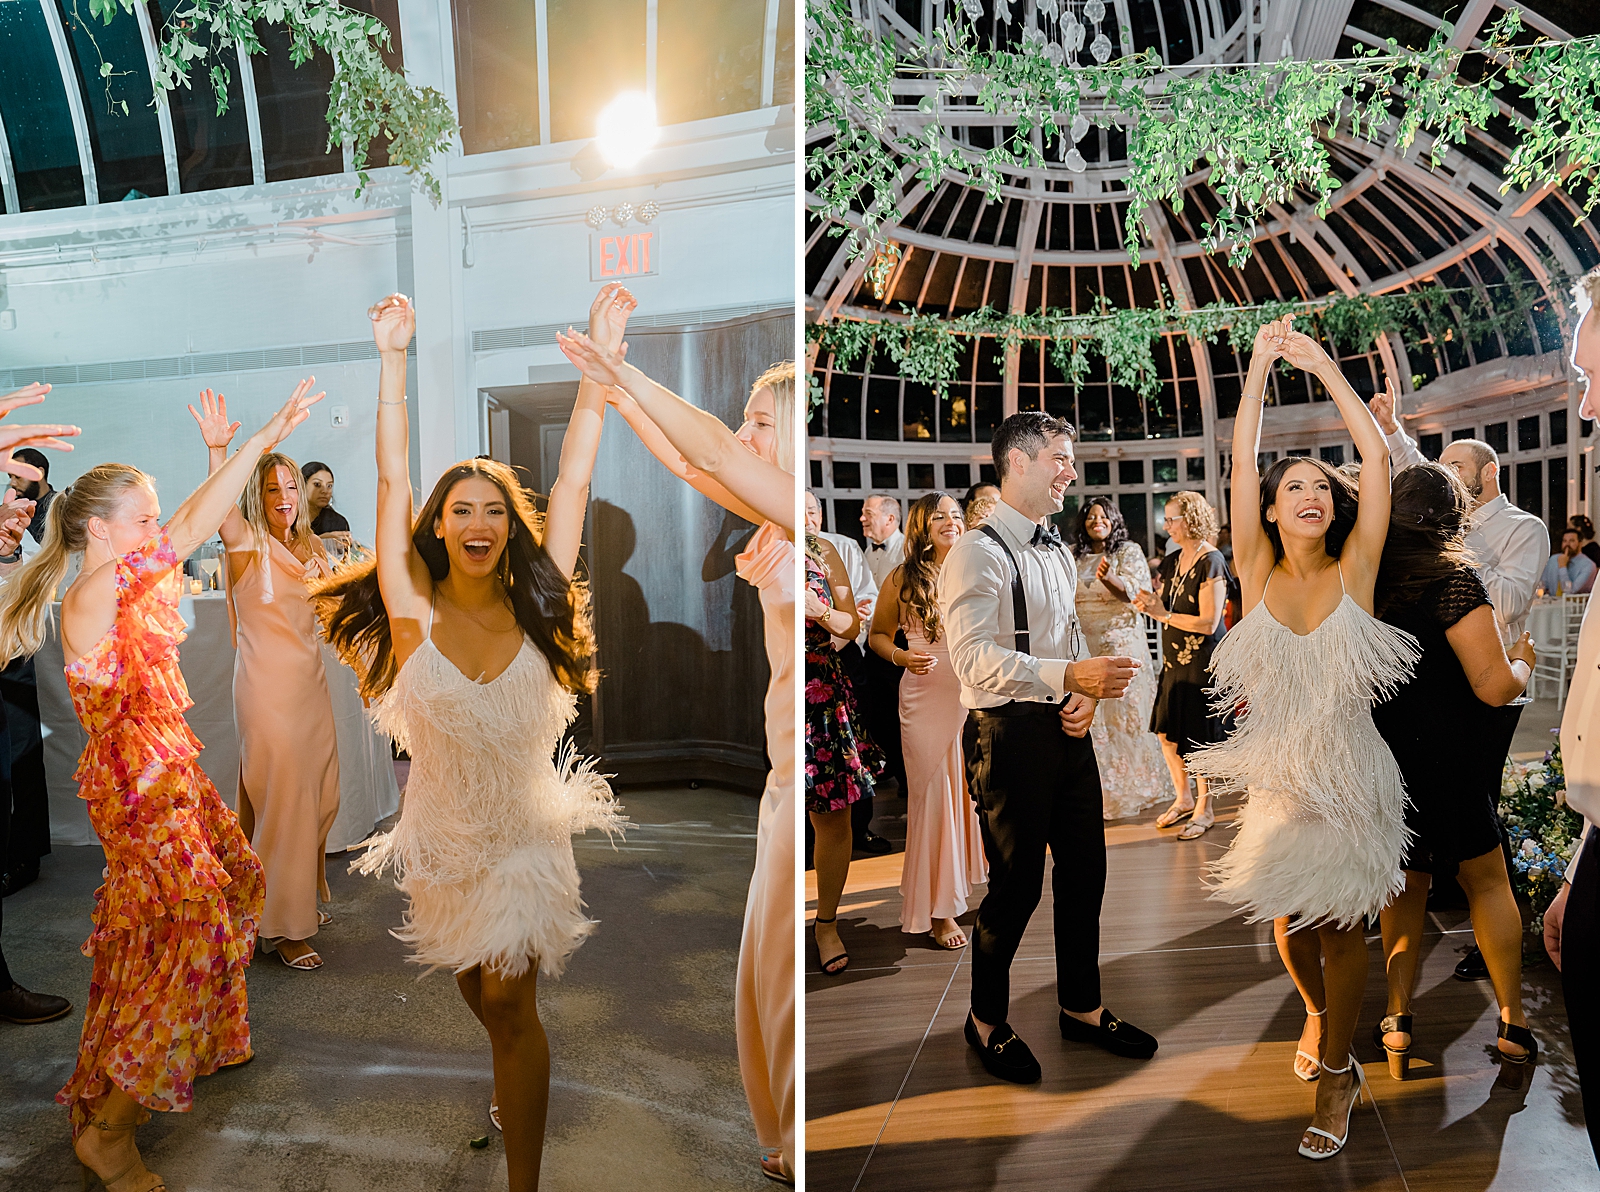 Left photo: The smiling bride throws her arms up for a photo.
Right photo: The bride and groom are all smiles as they dance on the dancefloor.